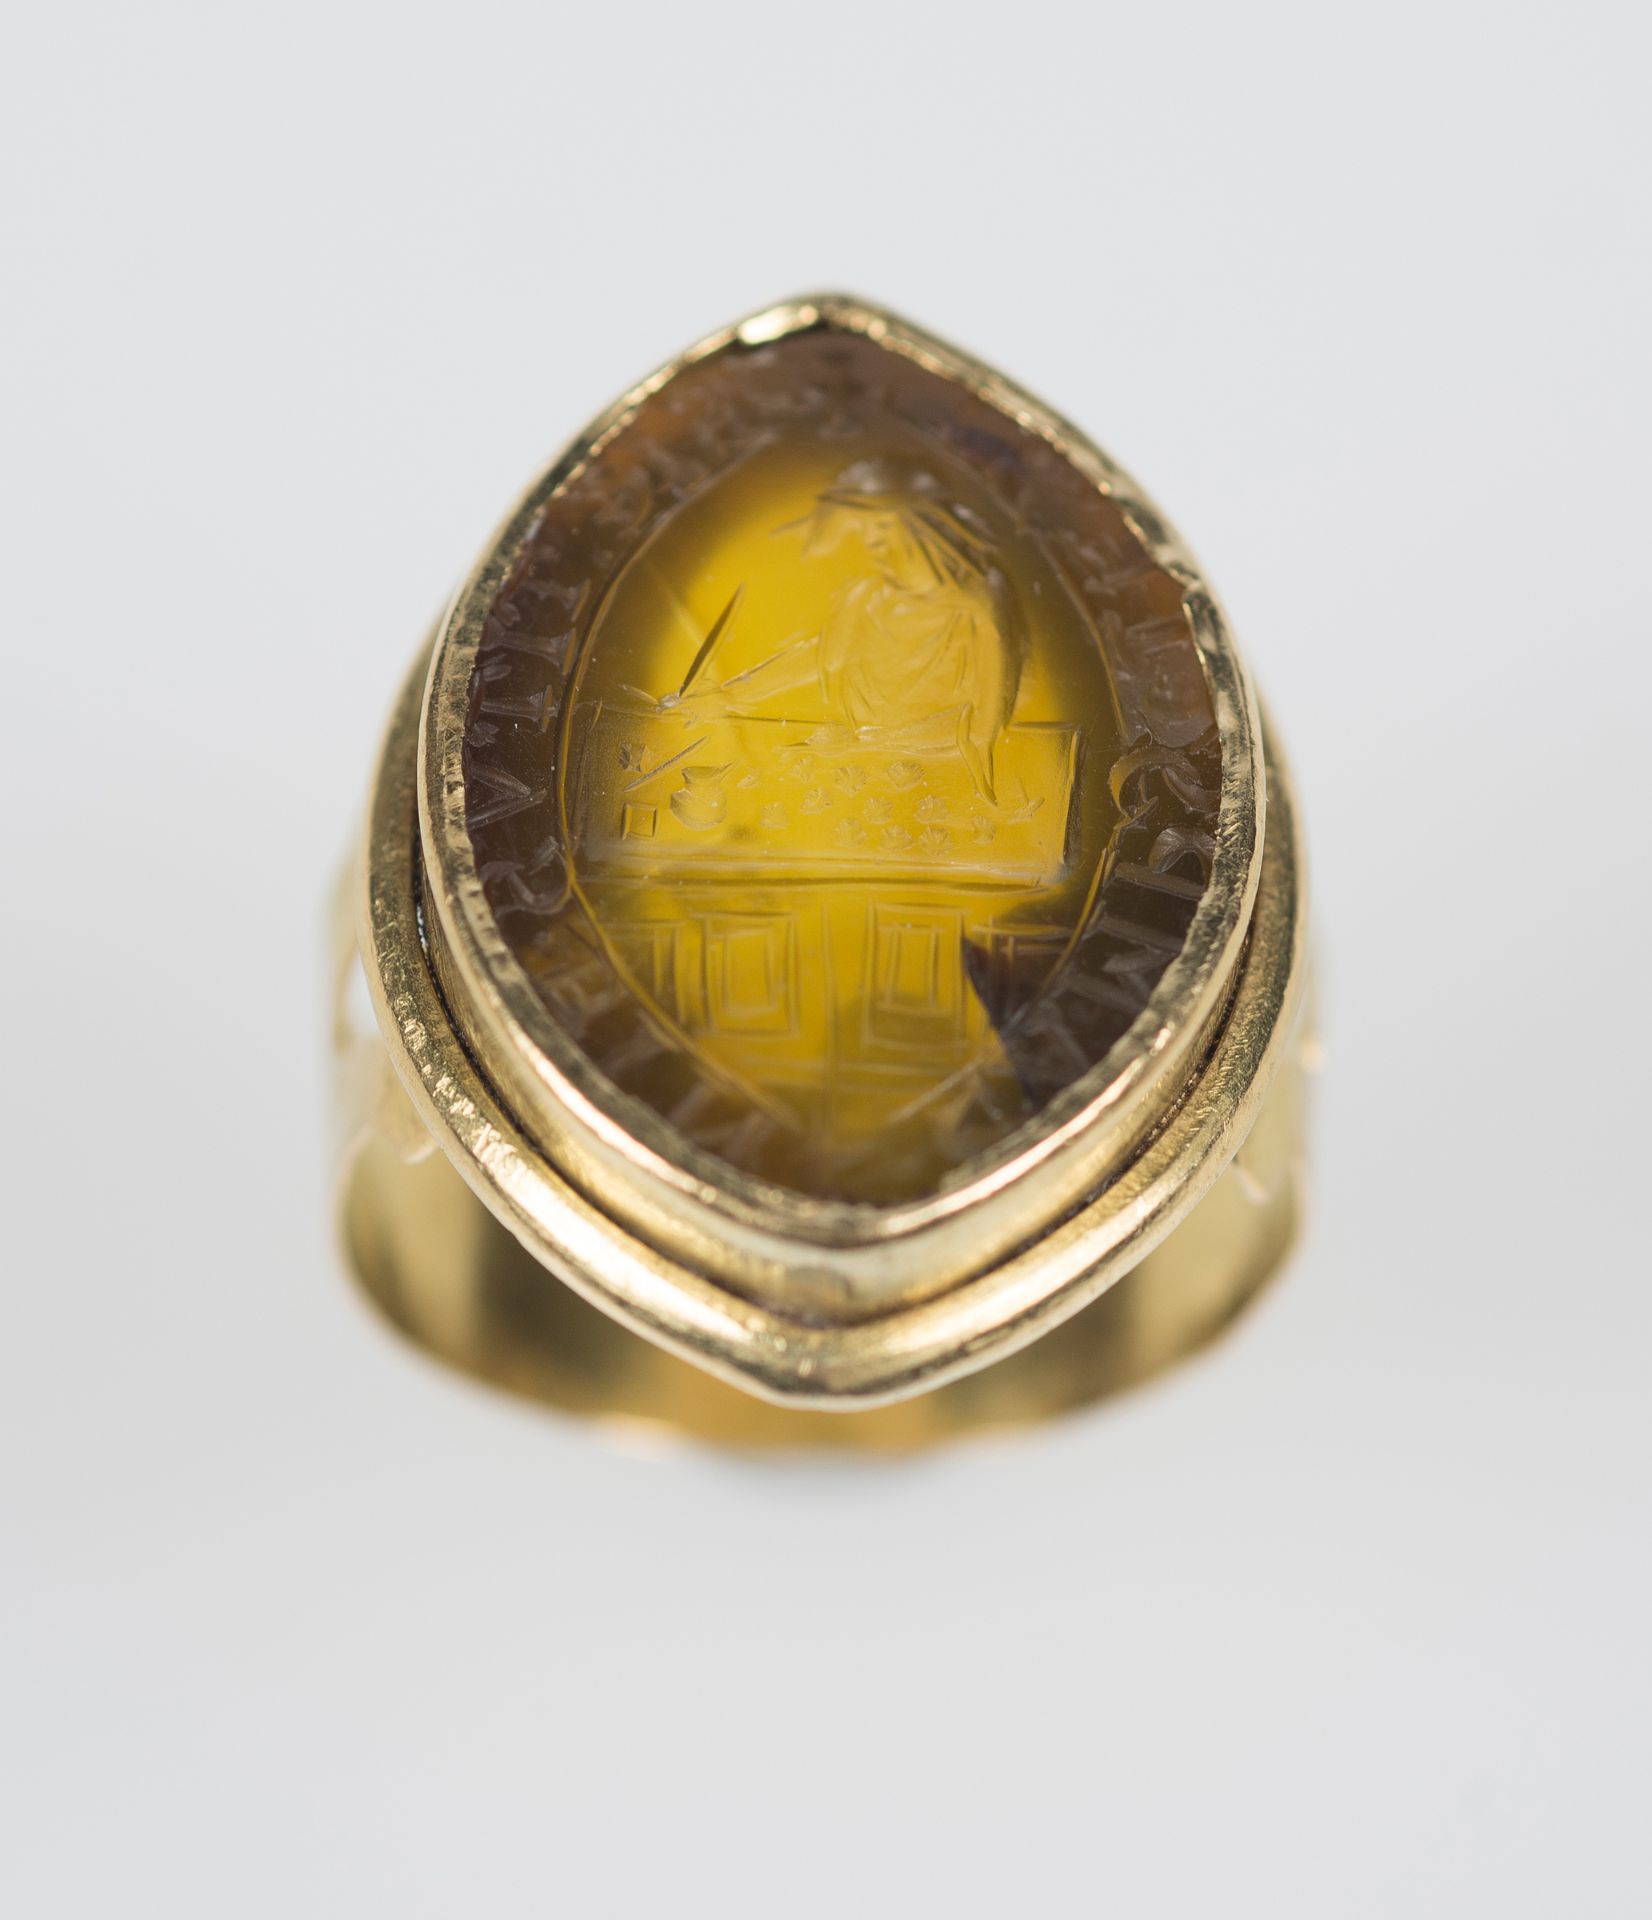 Rare, gold and agate money changer’s seal. Medieval period. Italy. Gothic. 14th century. - Image 3 of 5